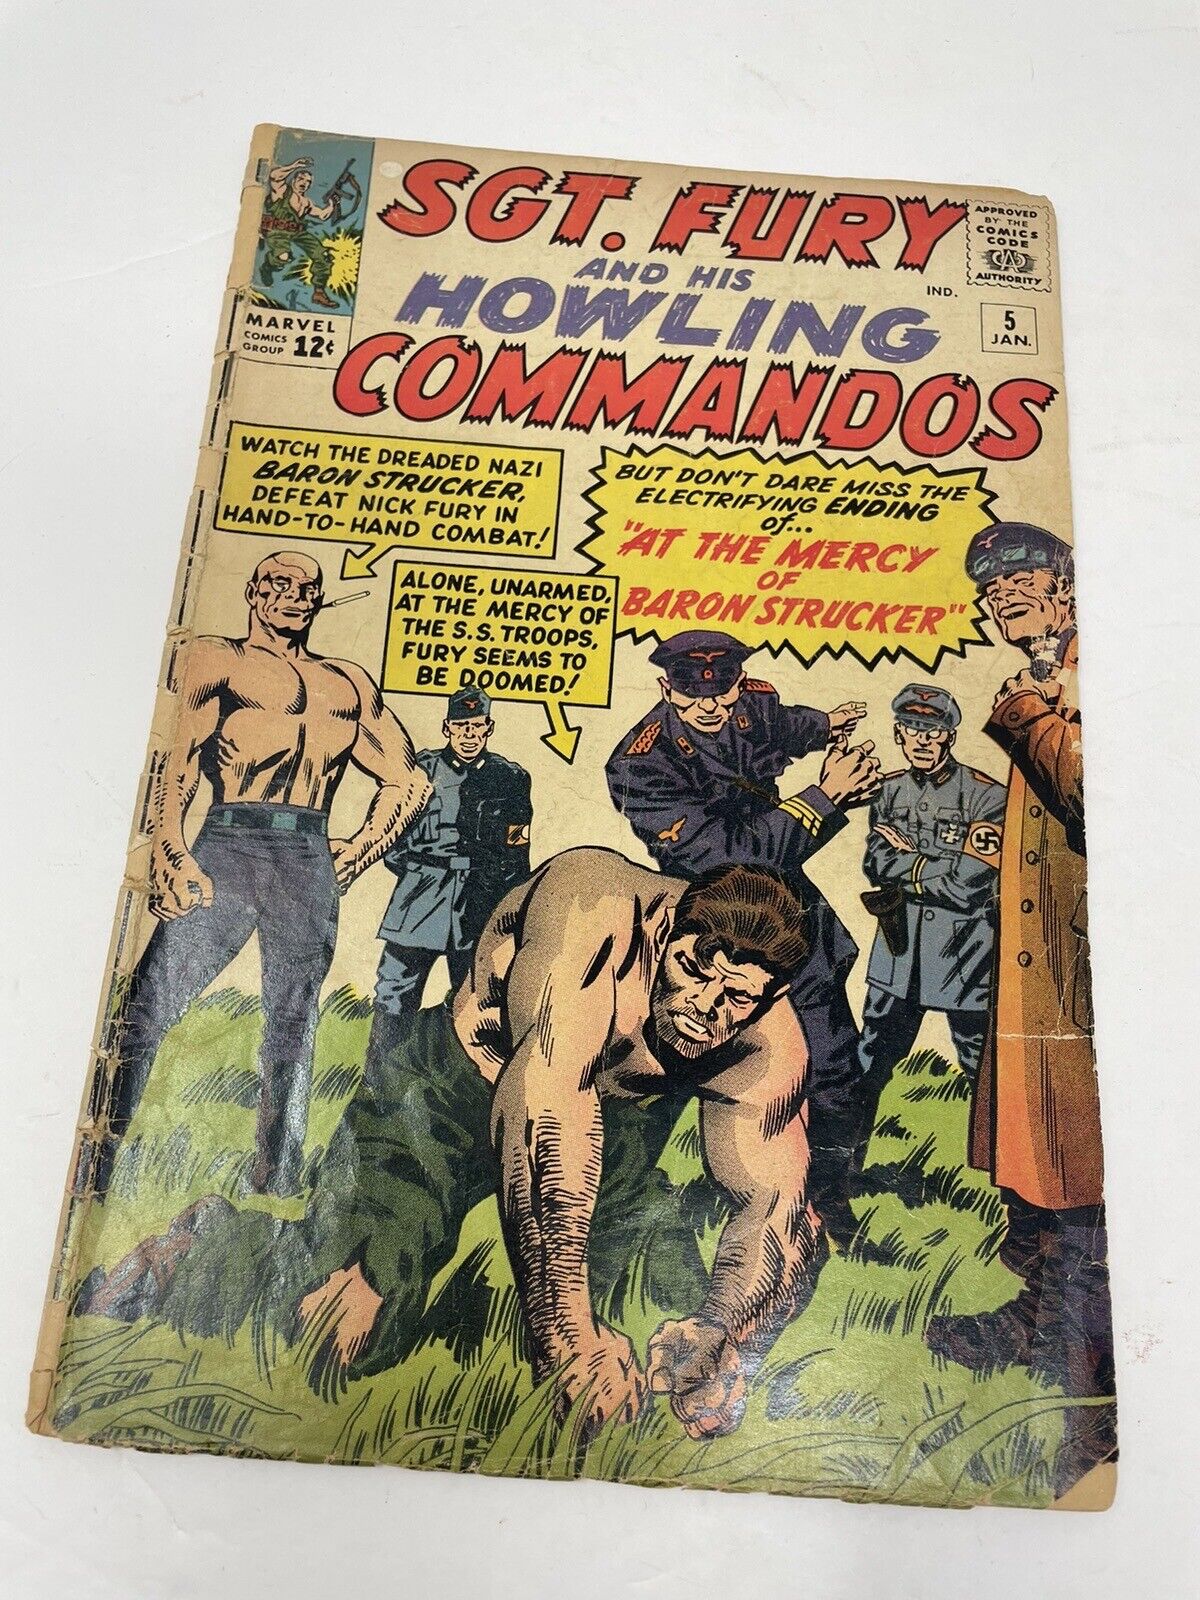 Sgt. Fury And His Howling Commandos #5 January 1964 1st Baron Strucker Marvel